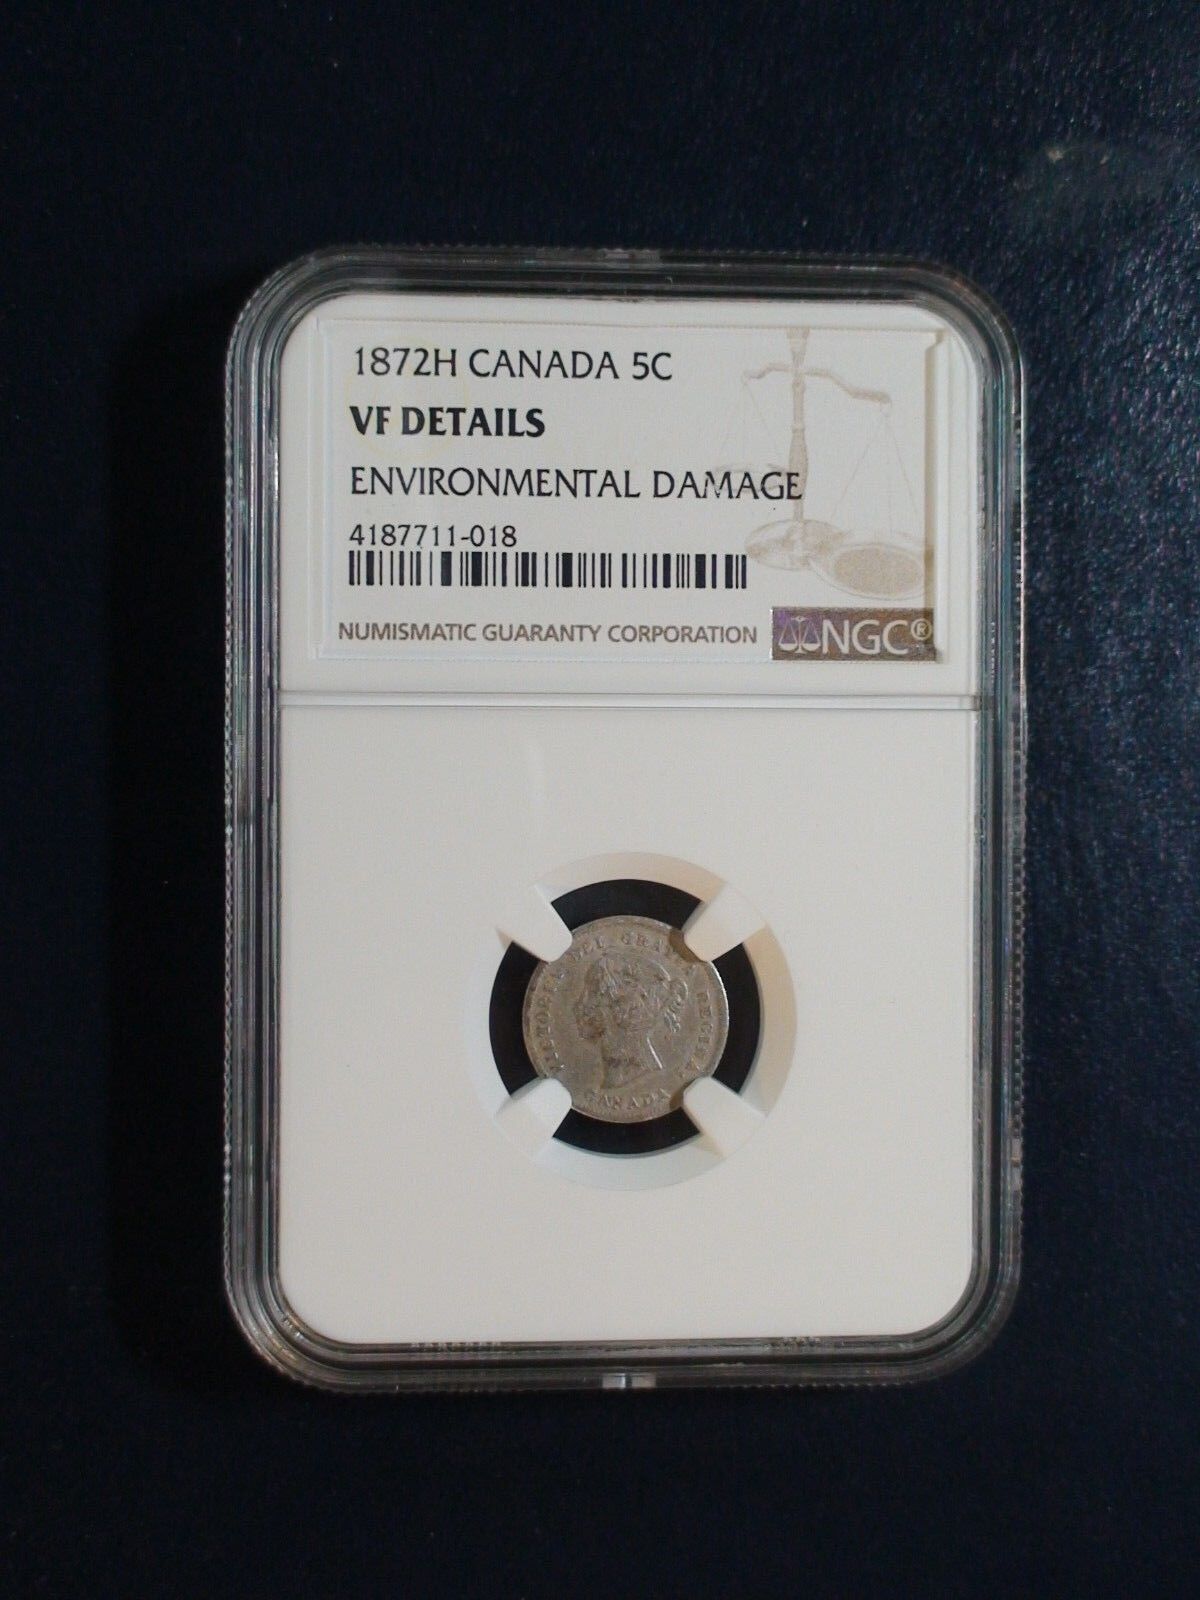 1872 H Canada Five Cents NGC VF SILVER CIRCULATED 5C Coin PRICED TO SELL